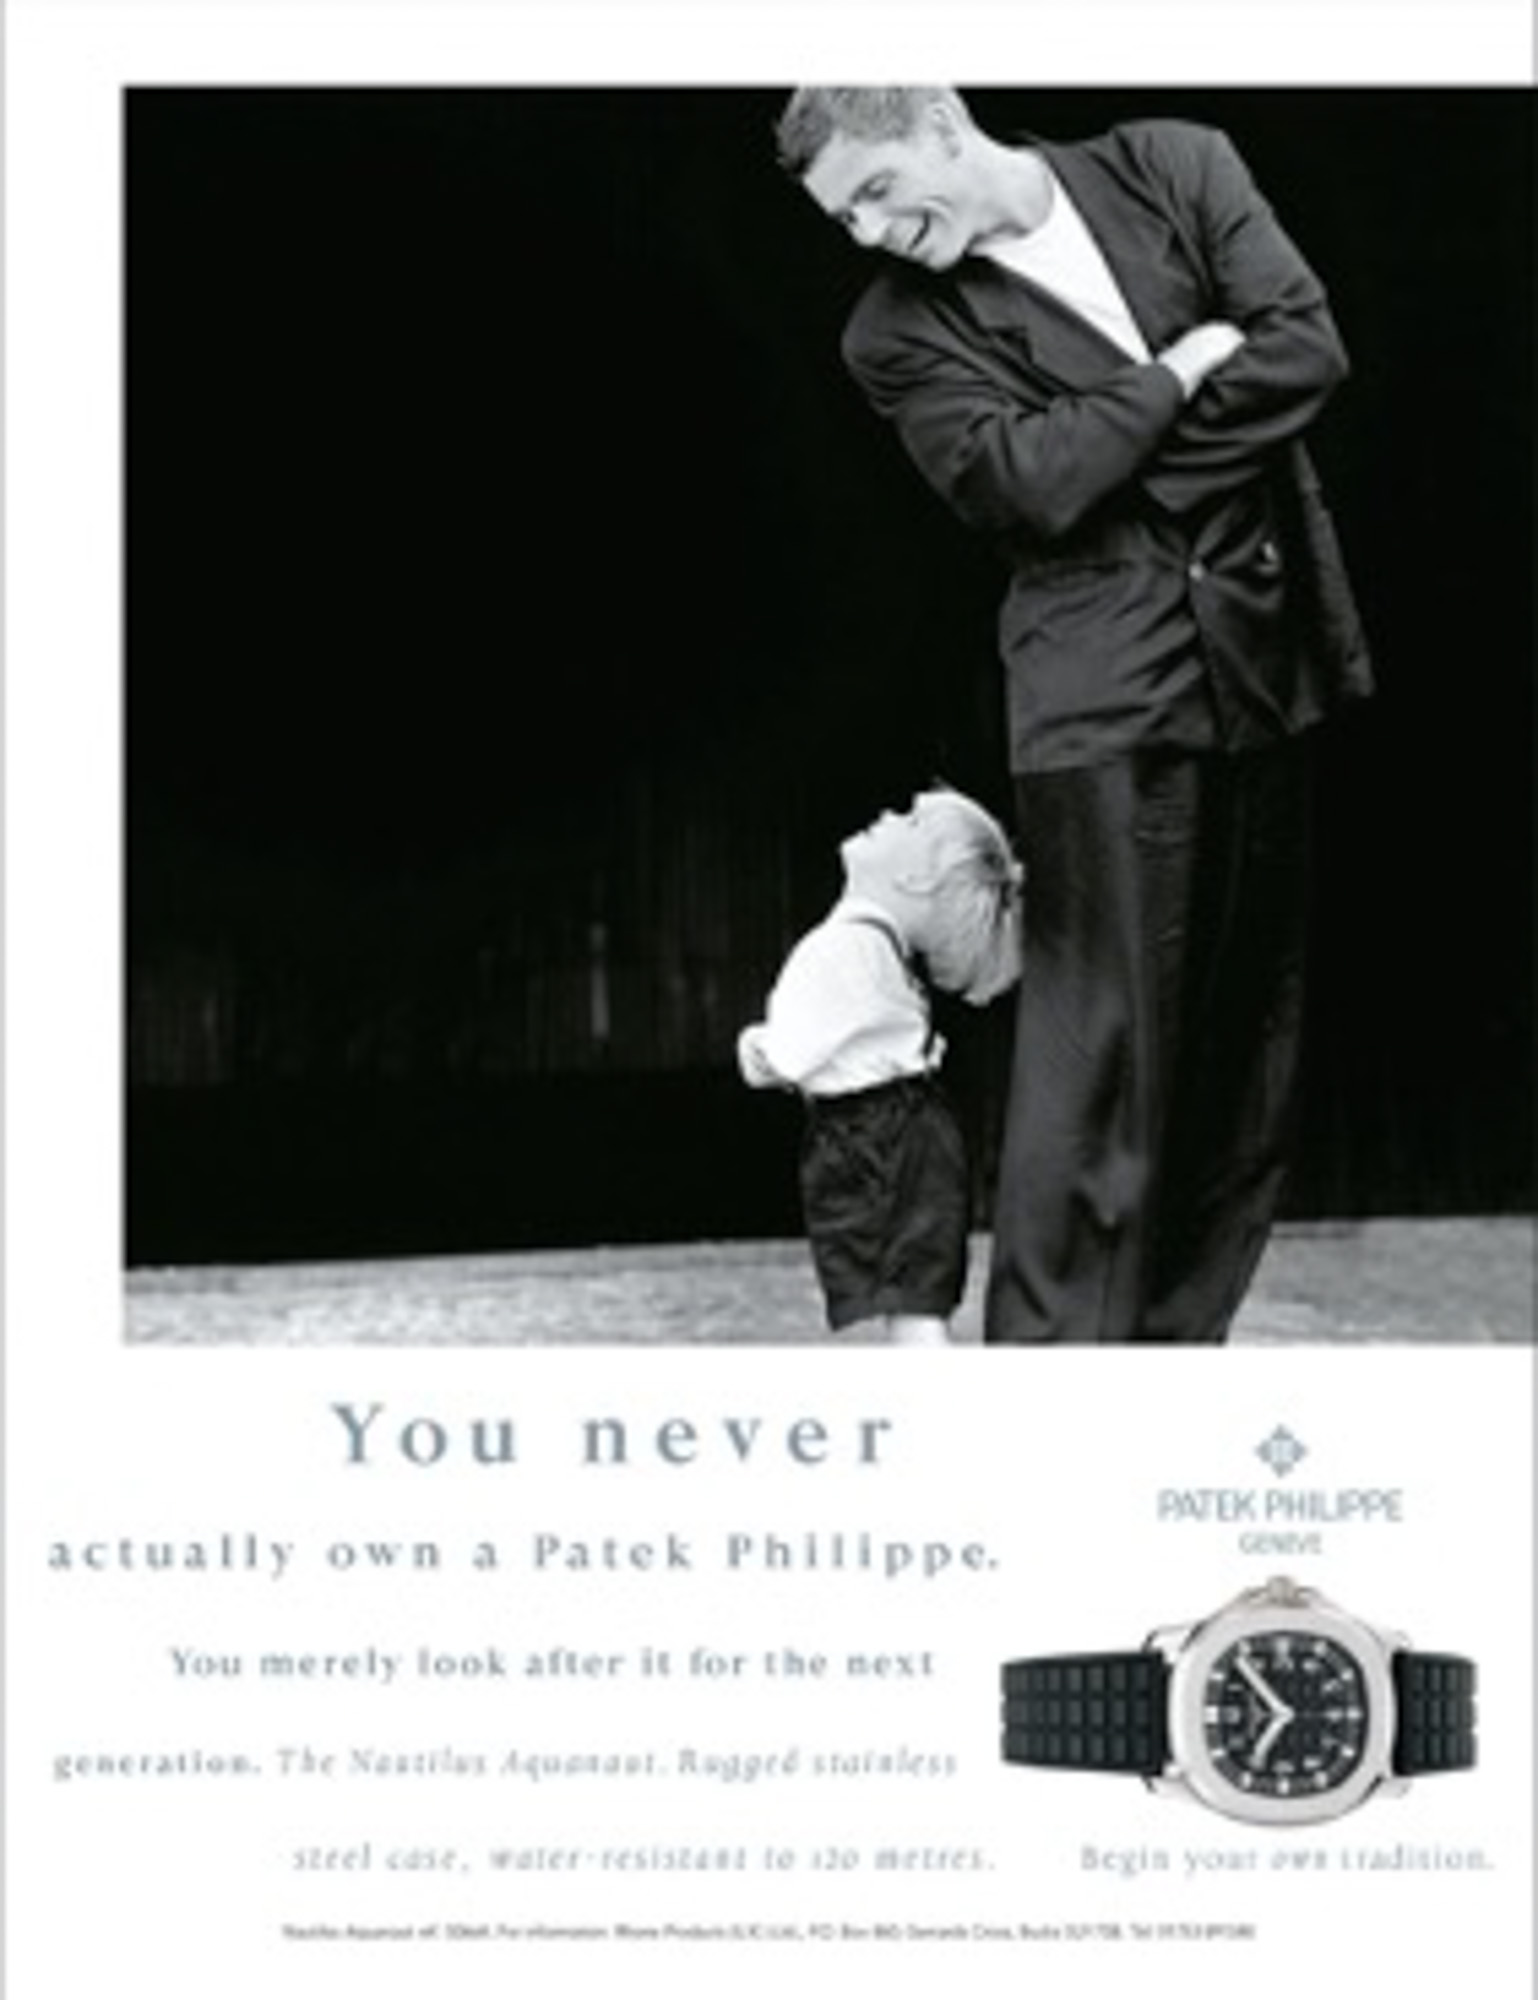 Patek Philippe Generations Campaign Advertising In 1997 Featured The Nautilus Aquanaut In Stainless Steel